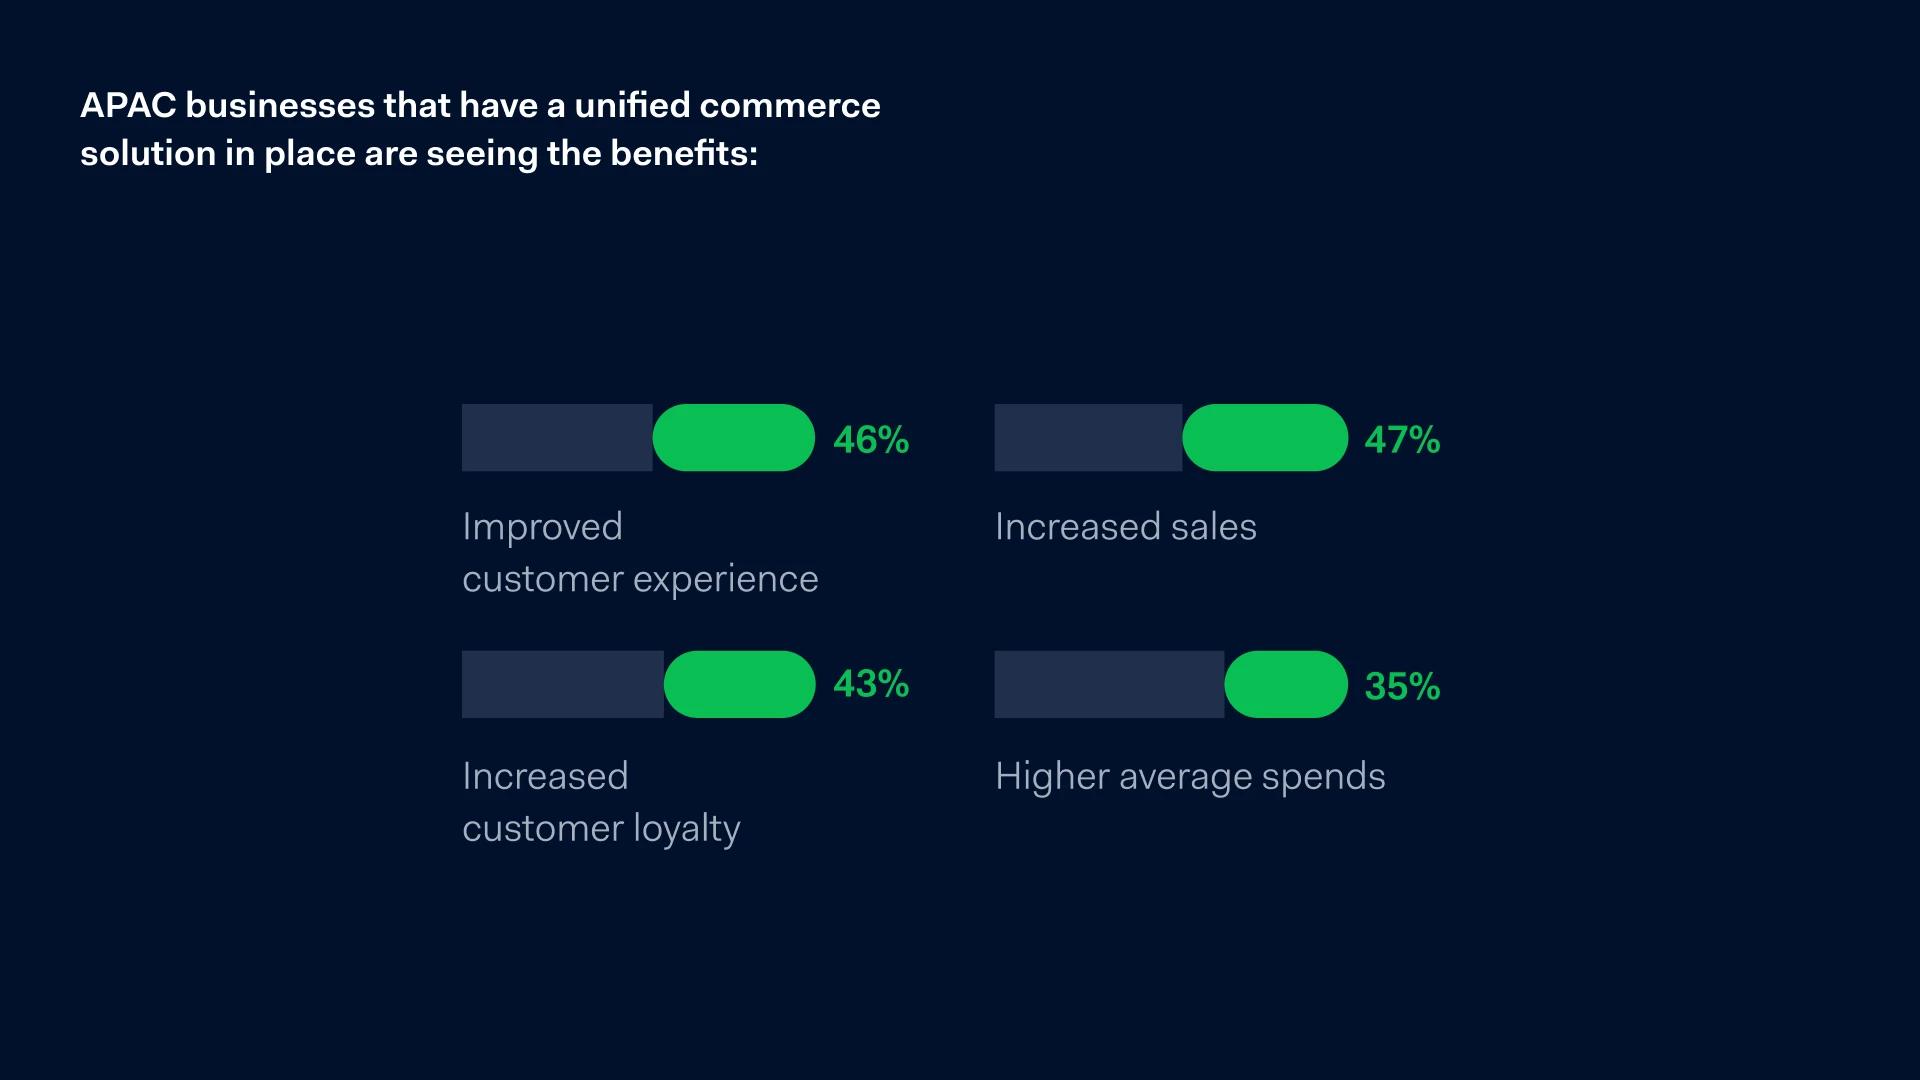 APAC businesses that have a unified commerce solution in place are seeing the benefits